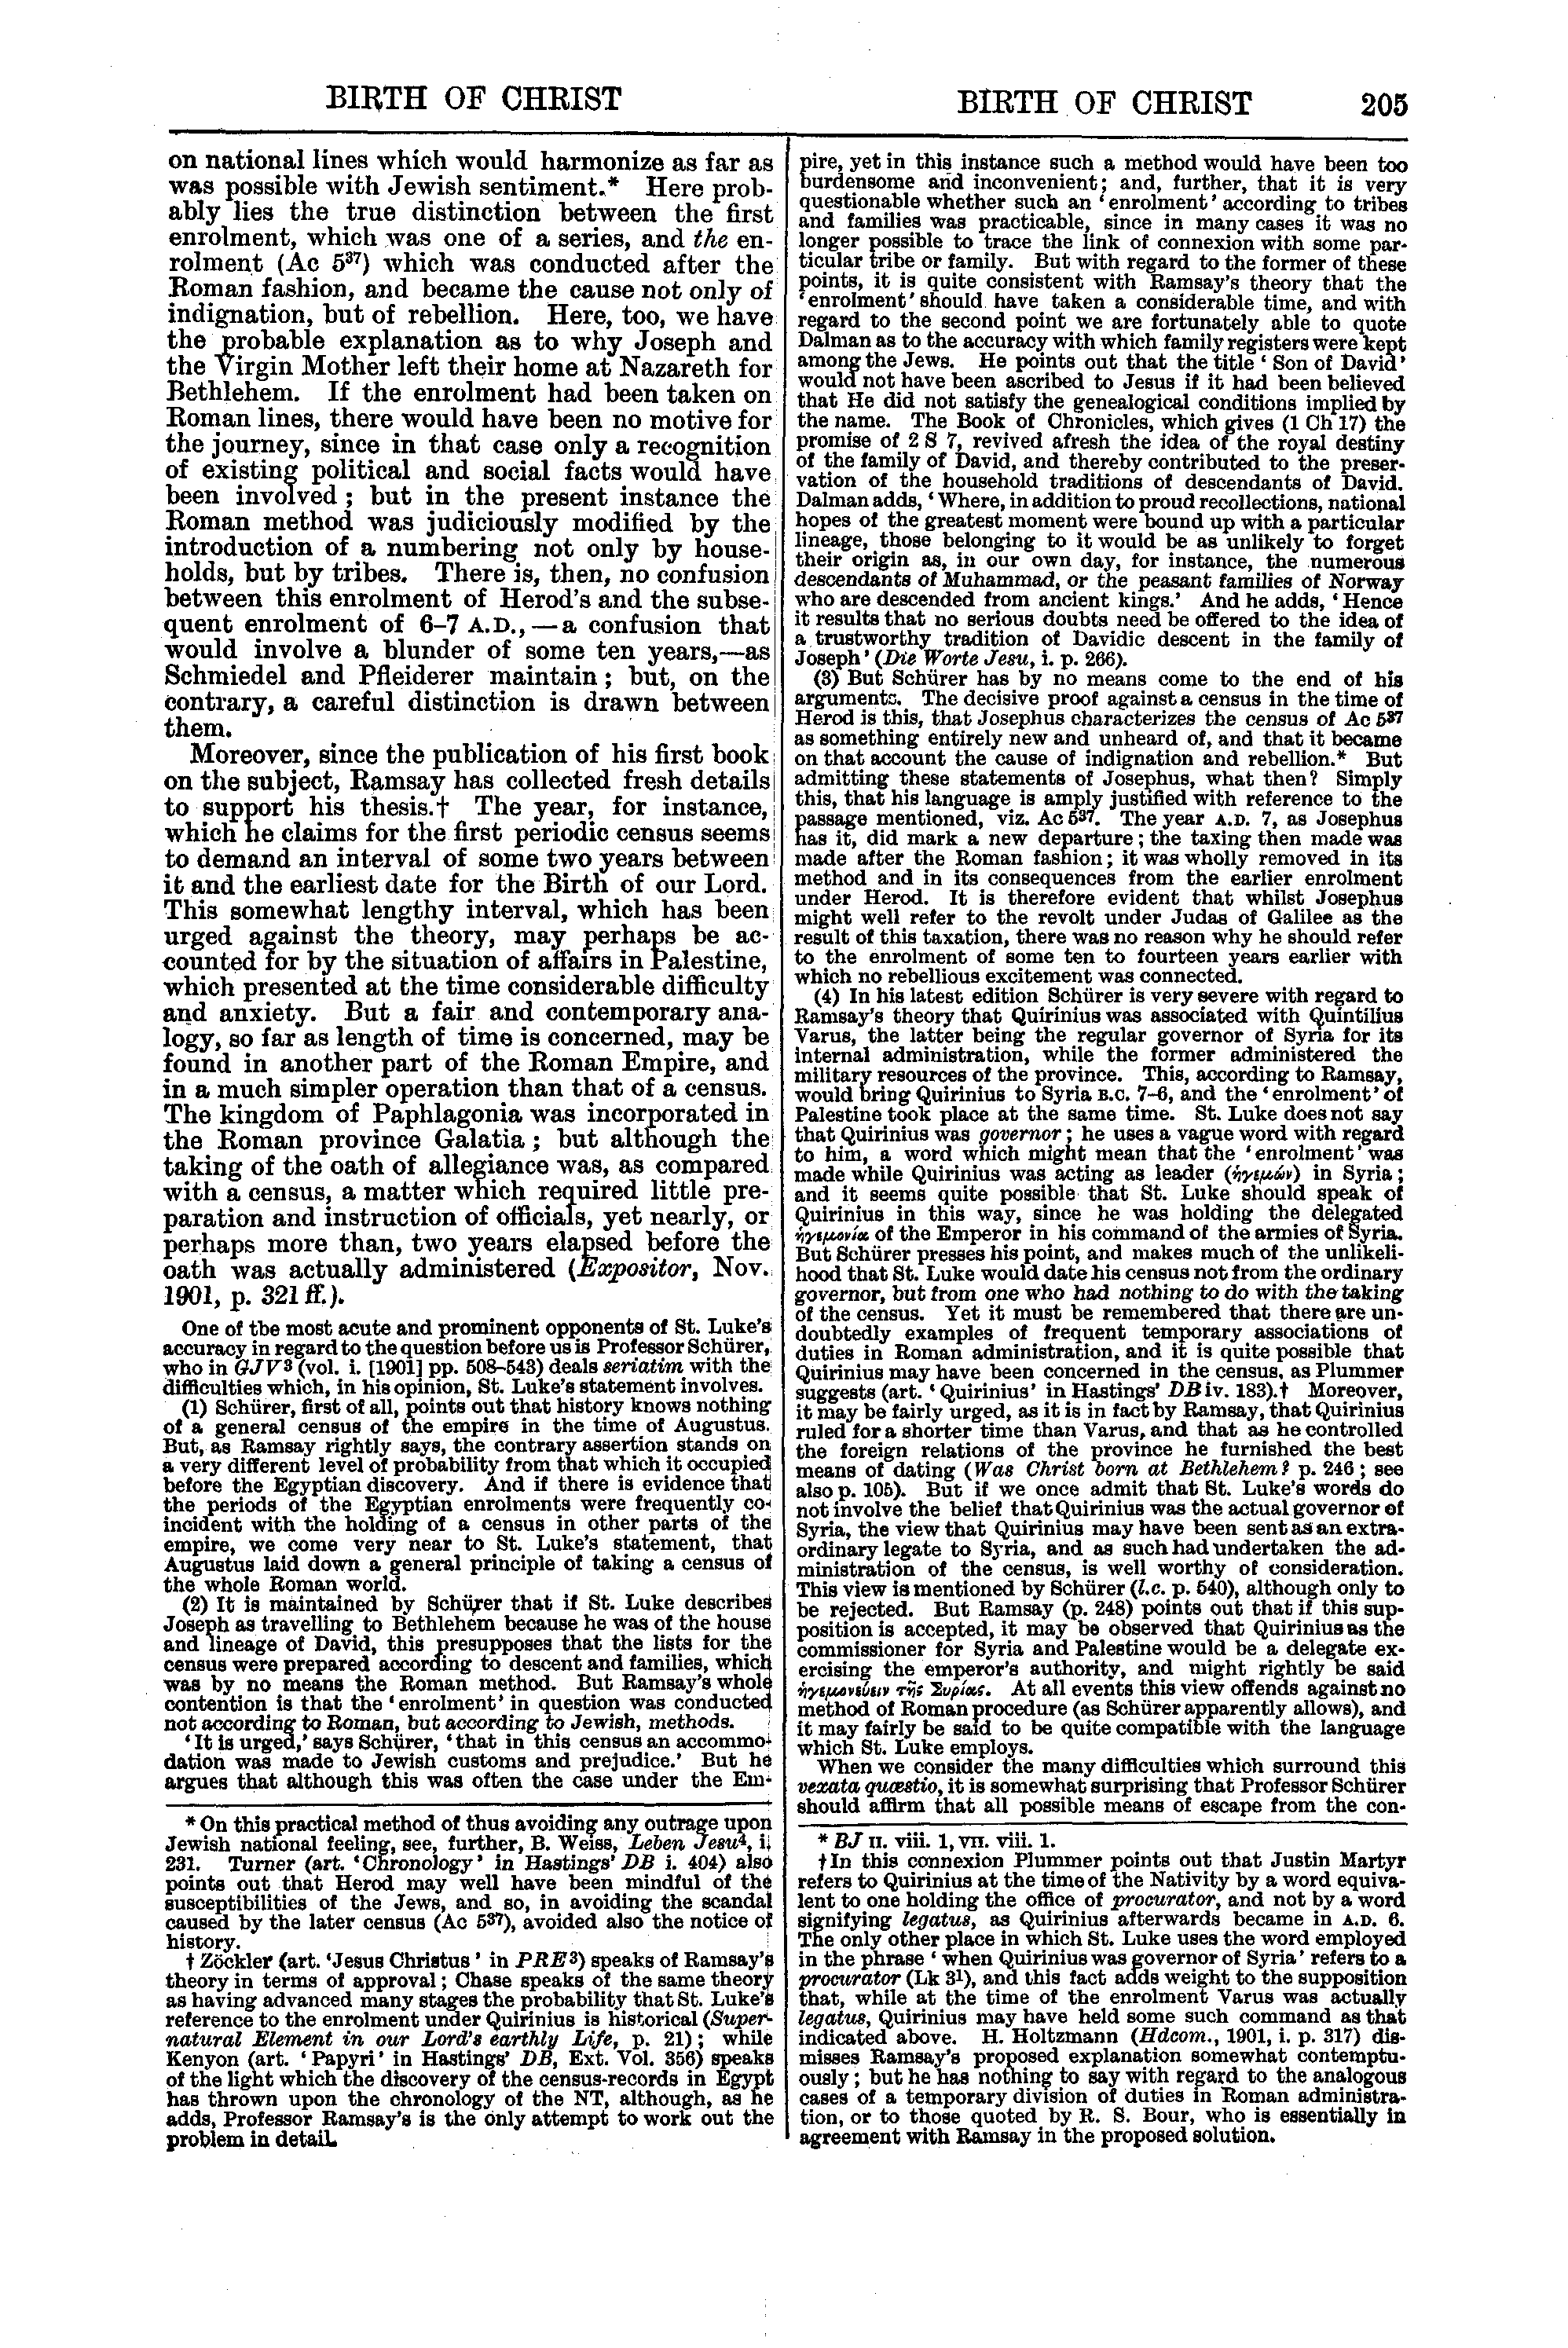 Image of page 205